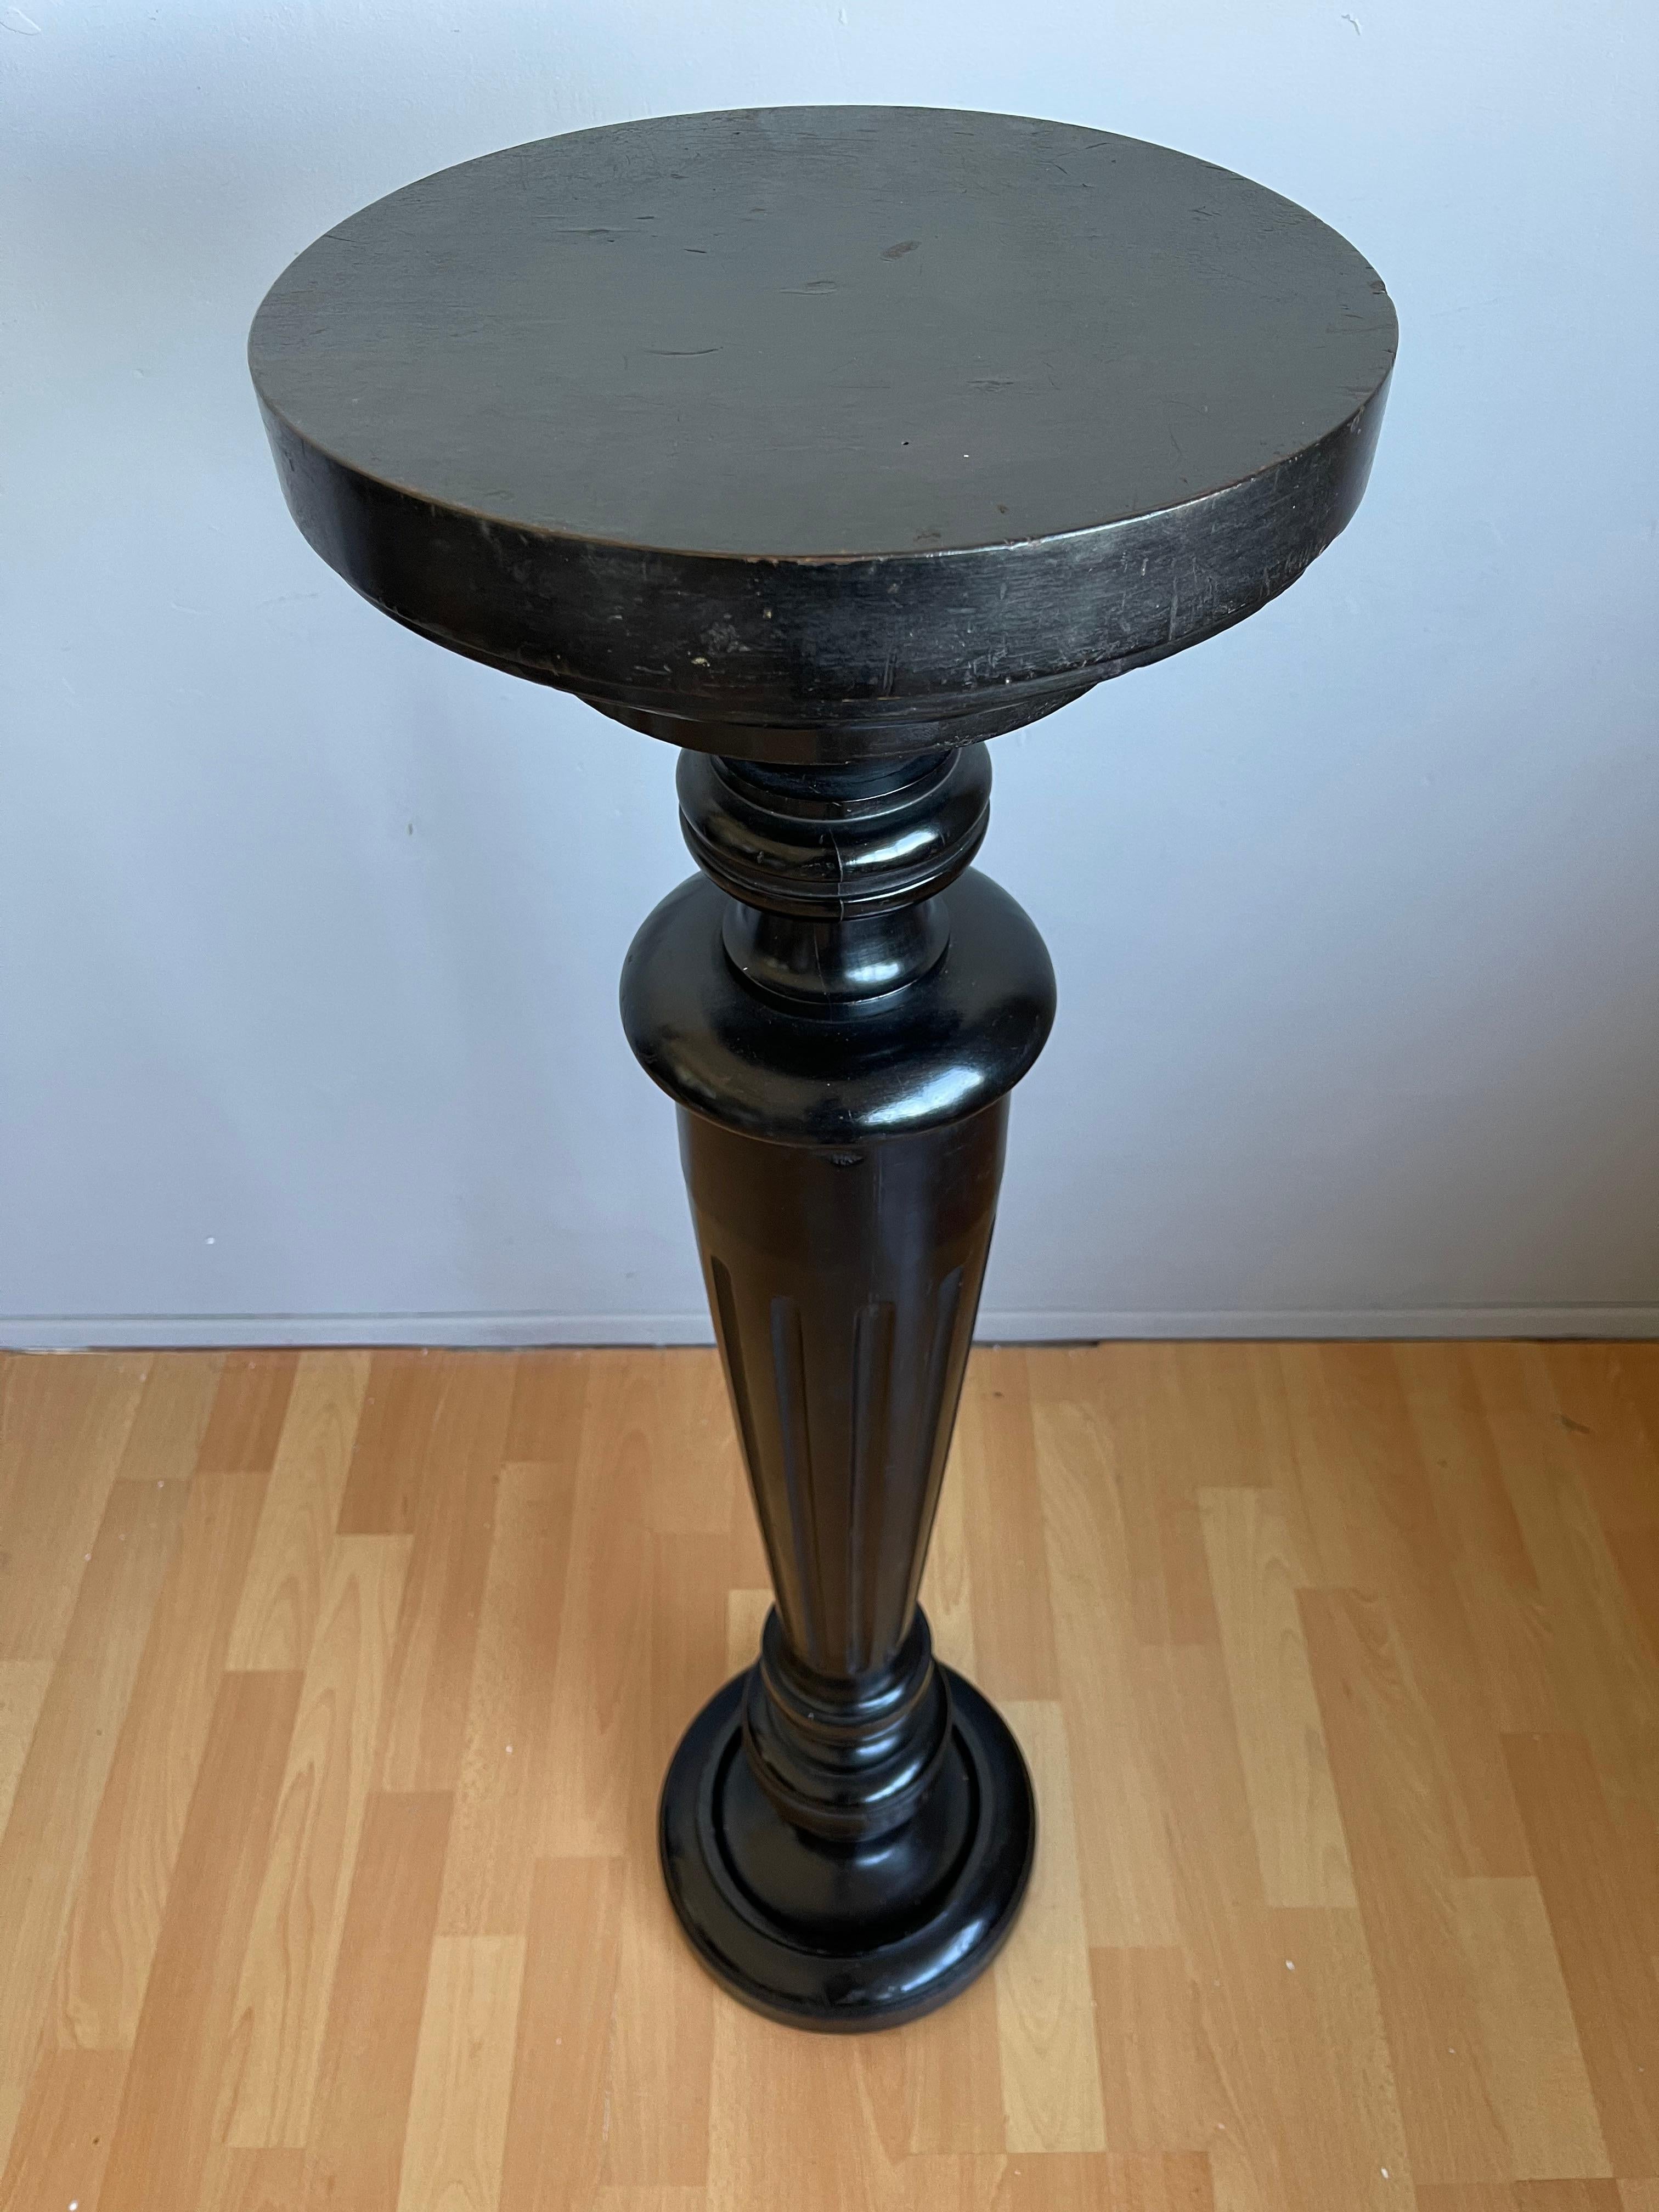 Classical Roman Stylish and Great Looking Antique, Ebonized Column Flower / Plant Pedestal Stand